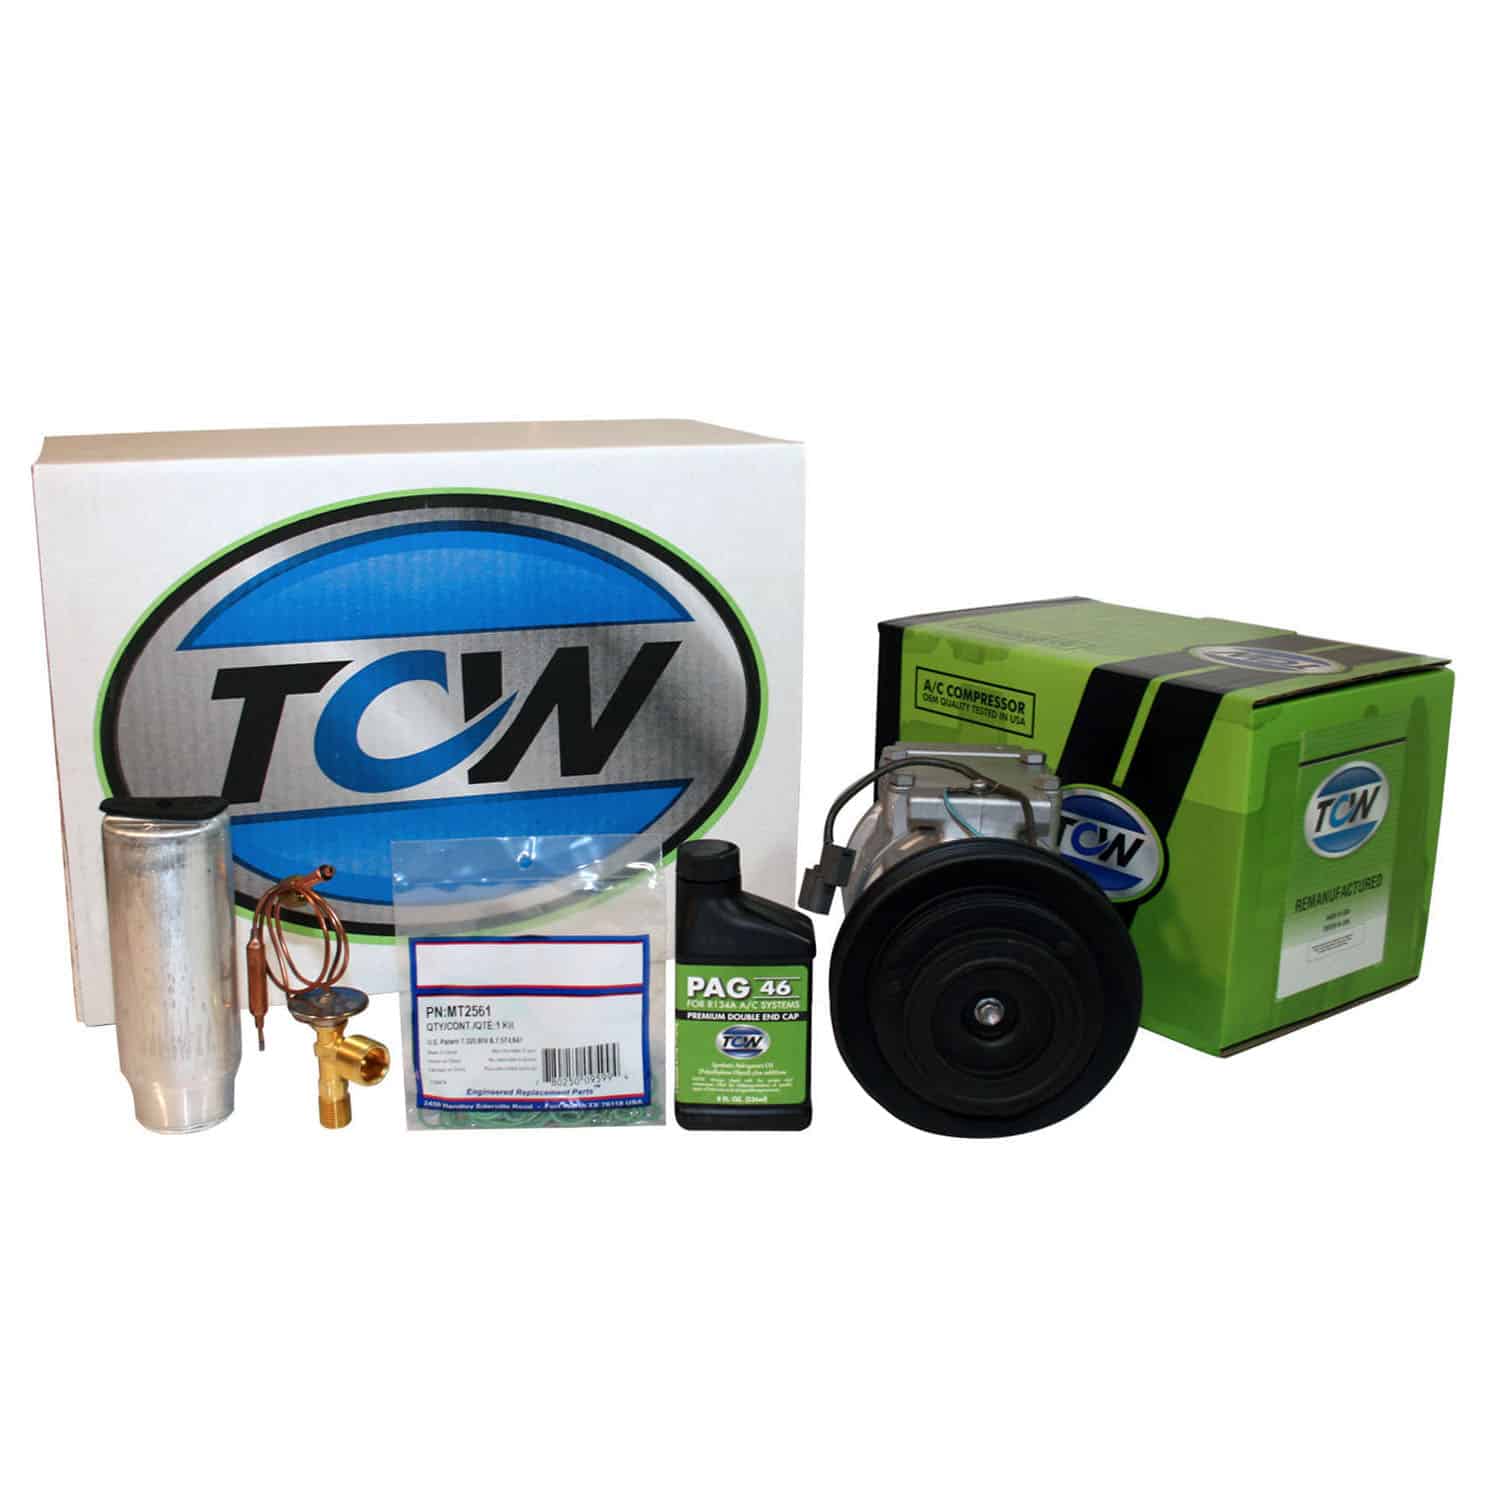 TCW Vehicle A/C Kit K1000526R Remanufactured